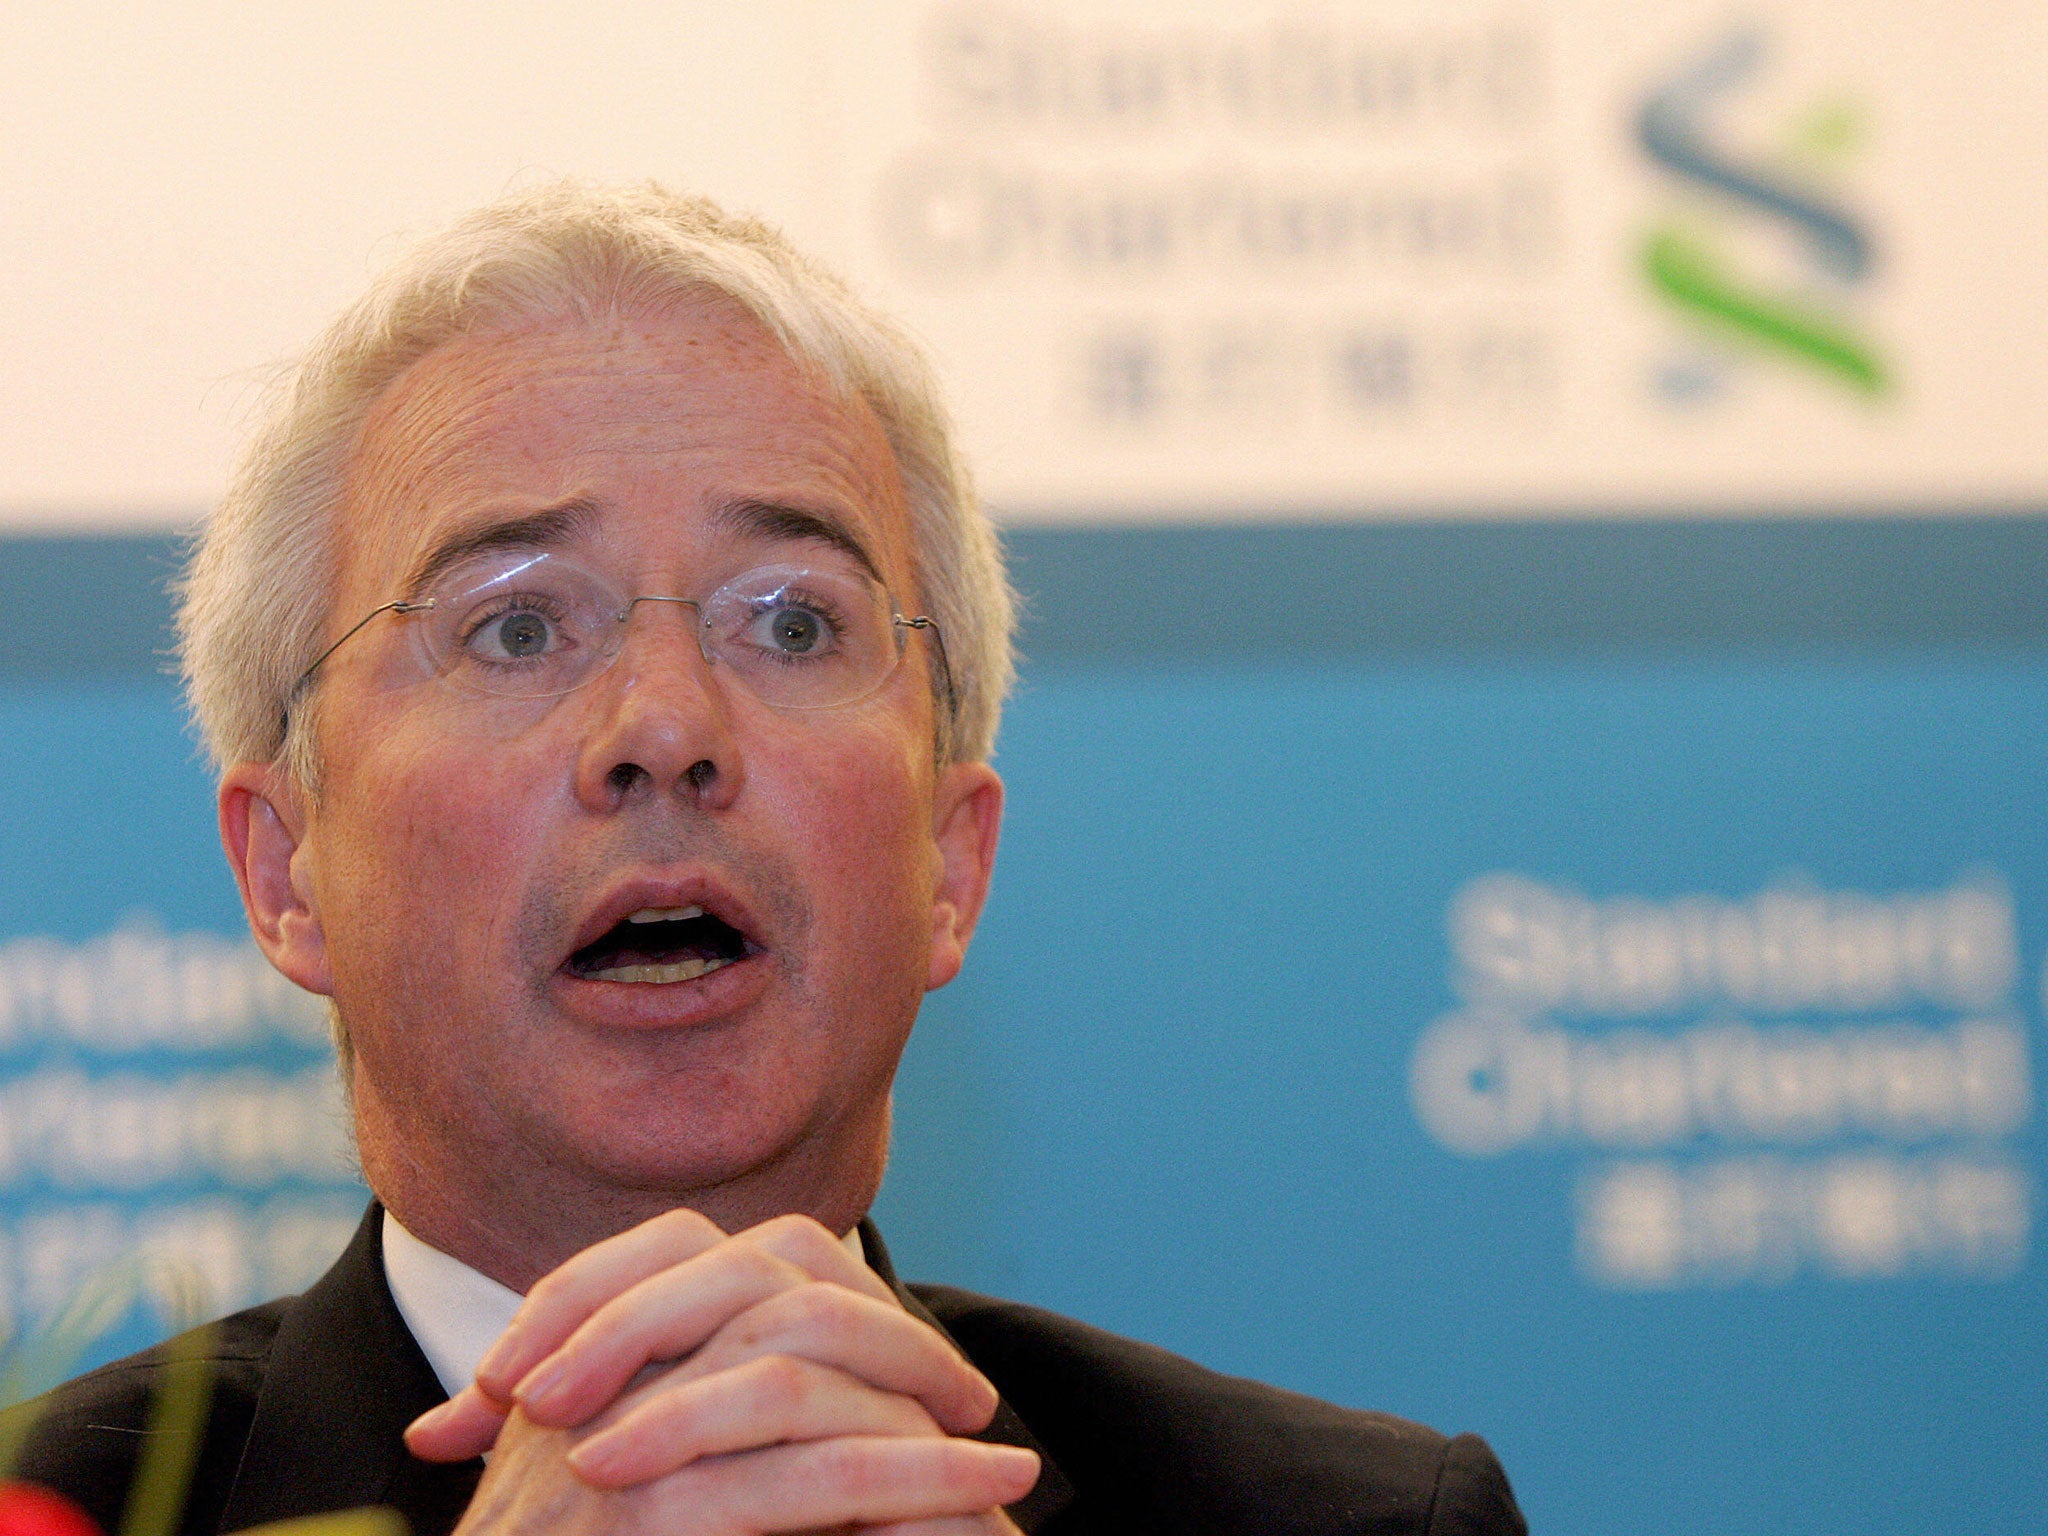 Standard Chartered Group Chief Executive Peter Sands